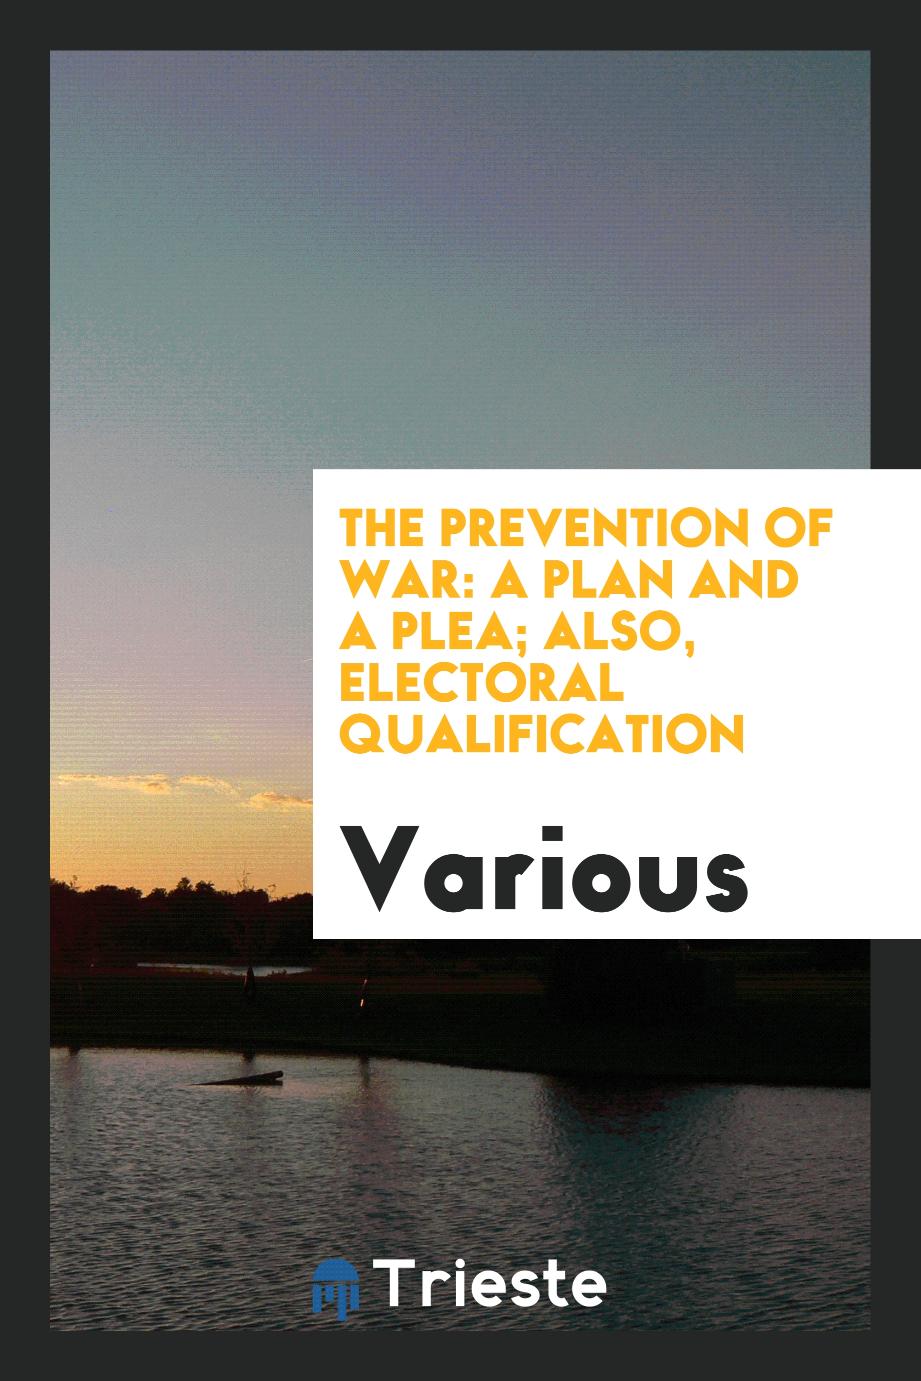 The prevention of war: a plan and a plea; Also, Electoral qualification